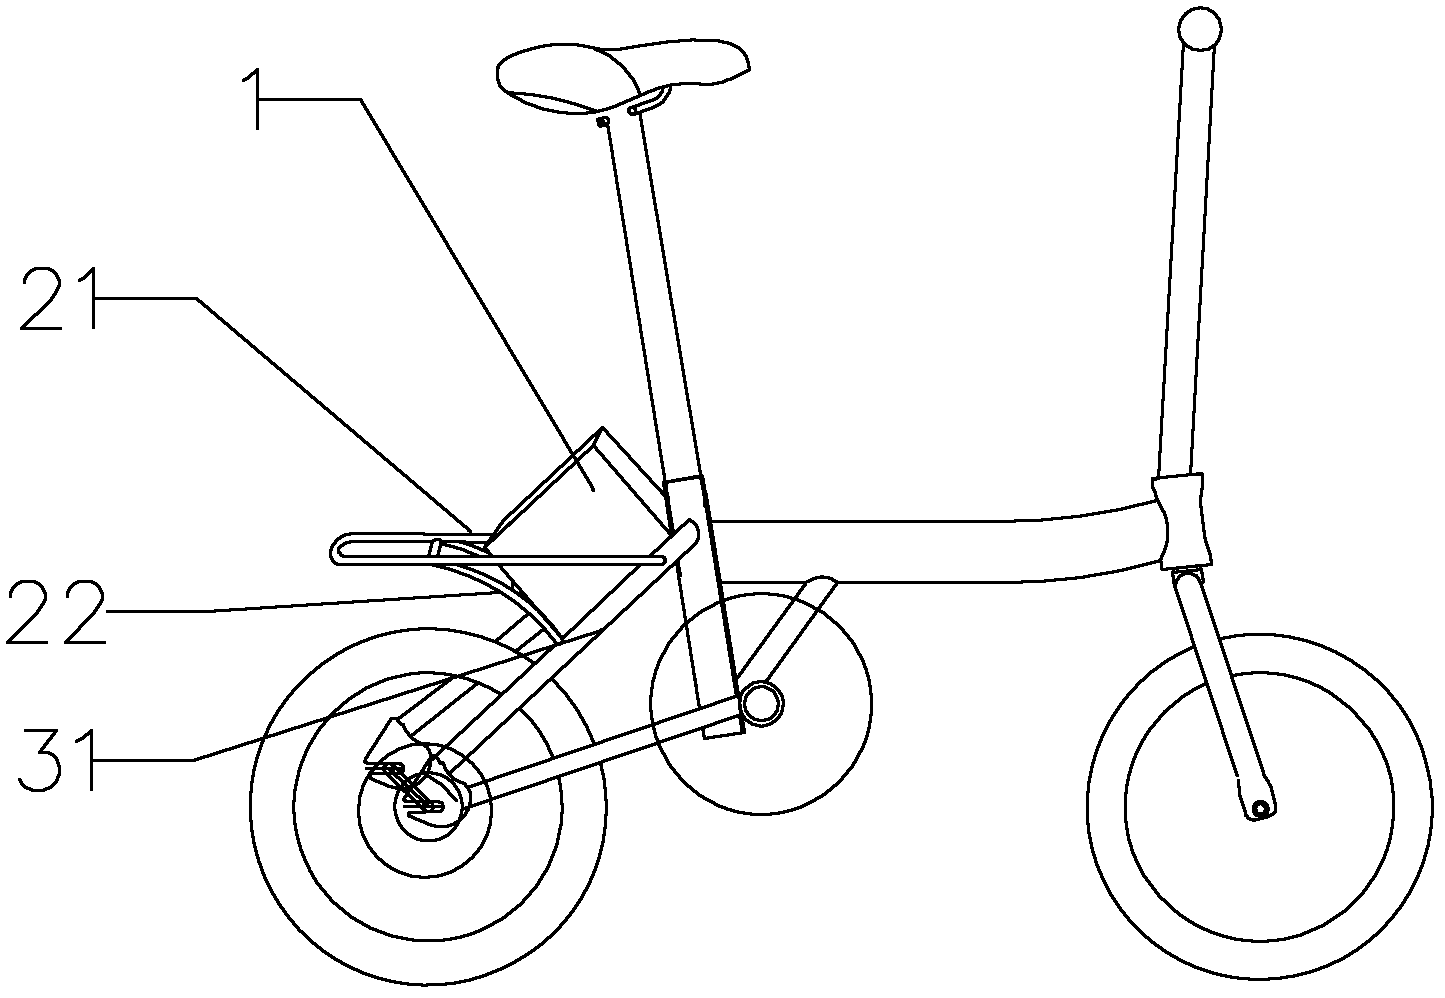 Electric bicycle with battery backing on upper fork